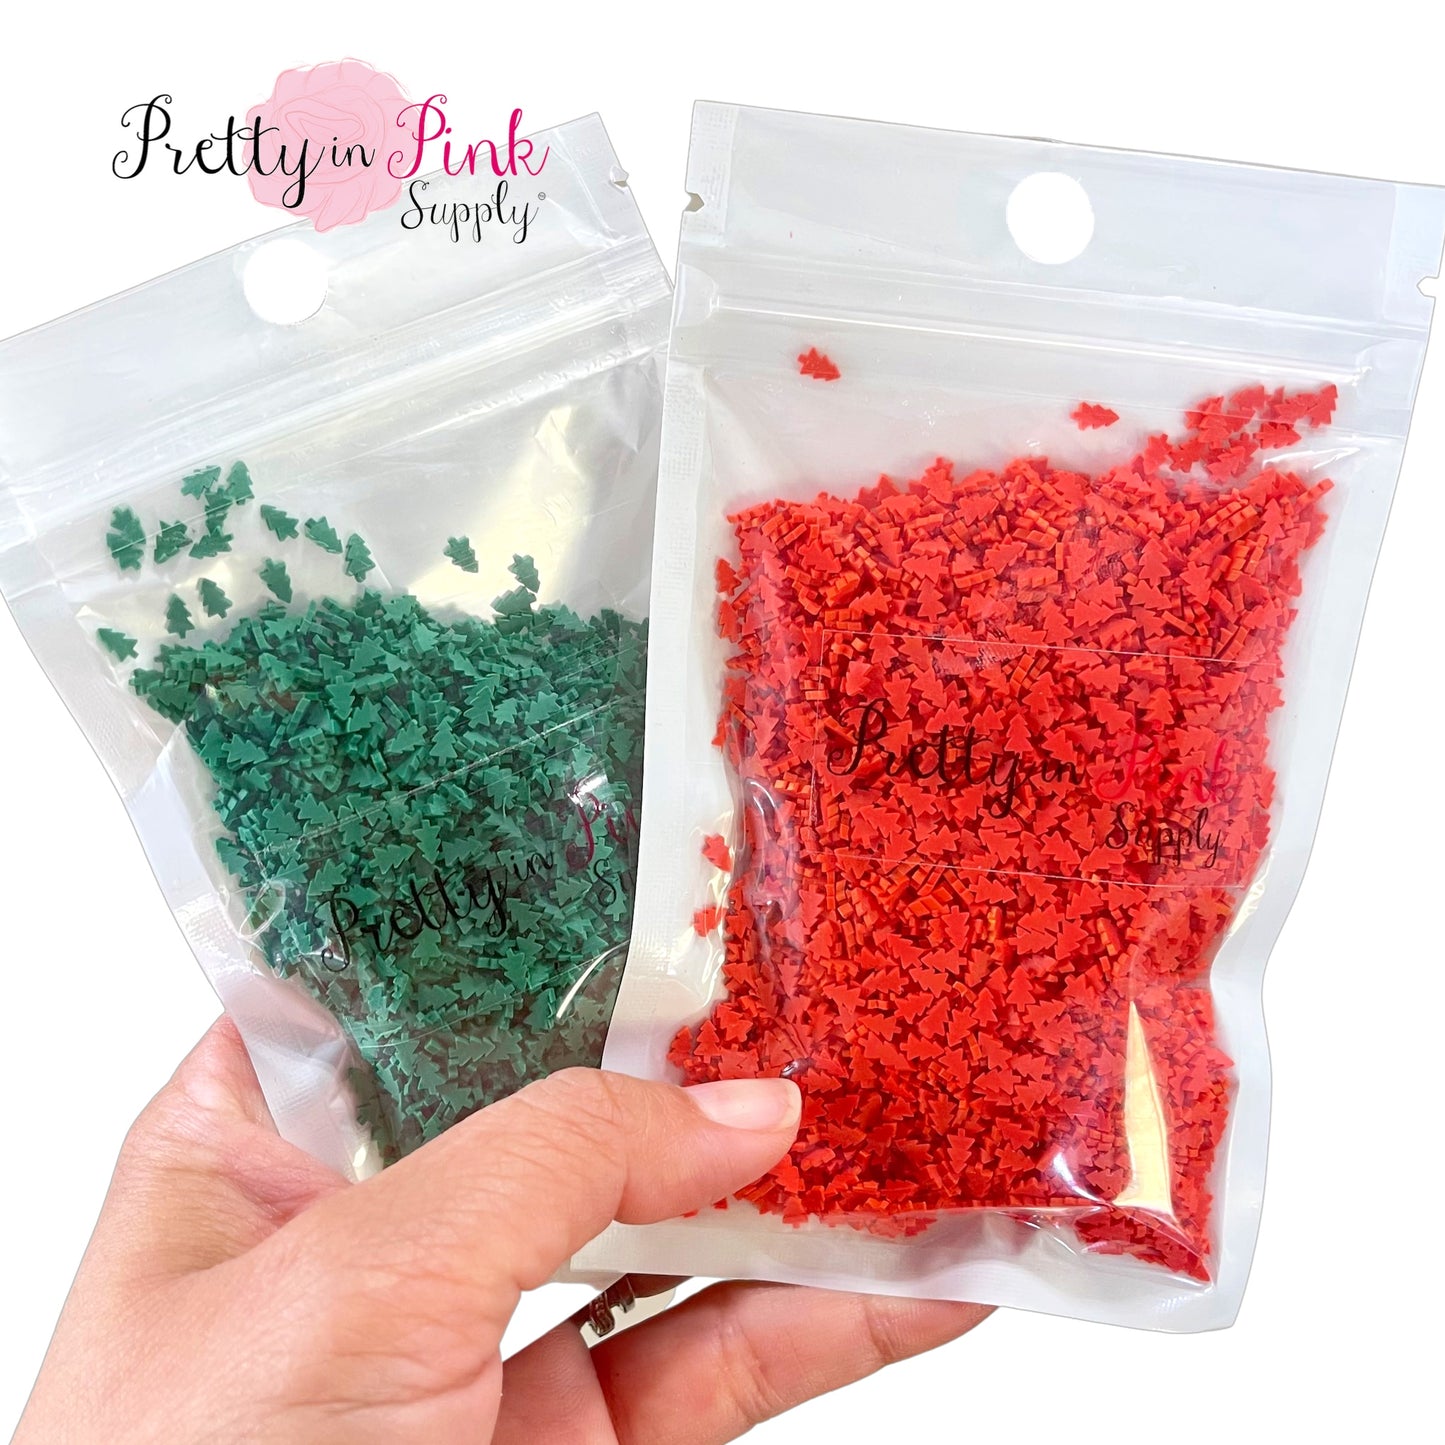 Hand holding bags of red and green Christmas tree clay slices.